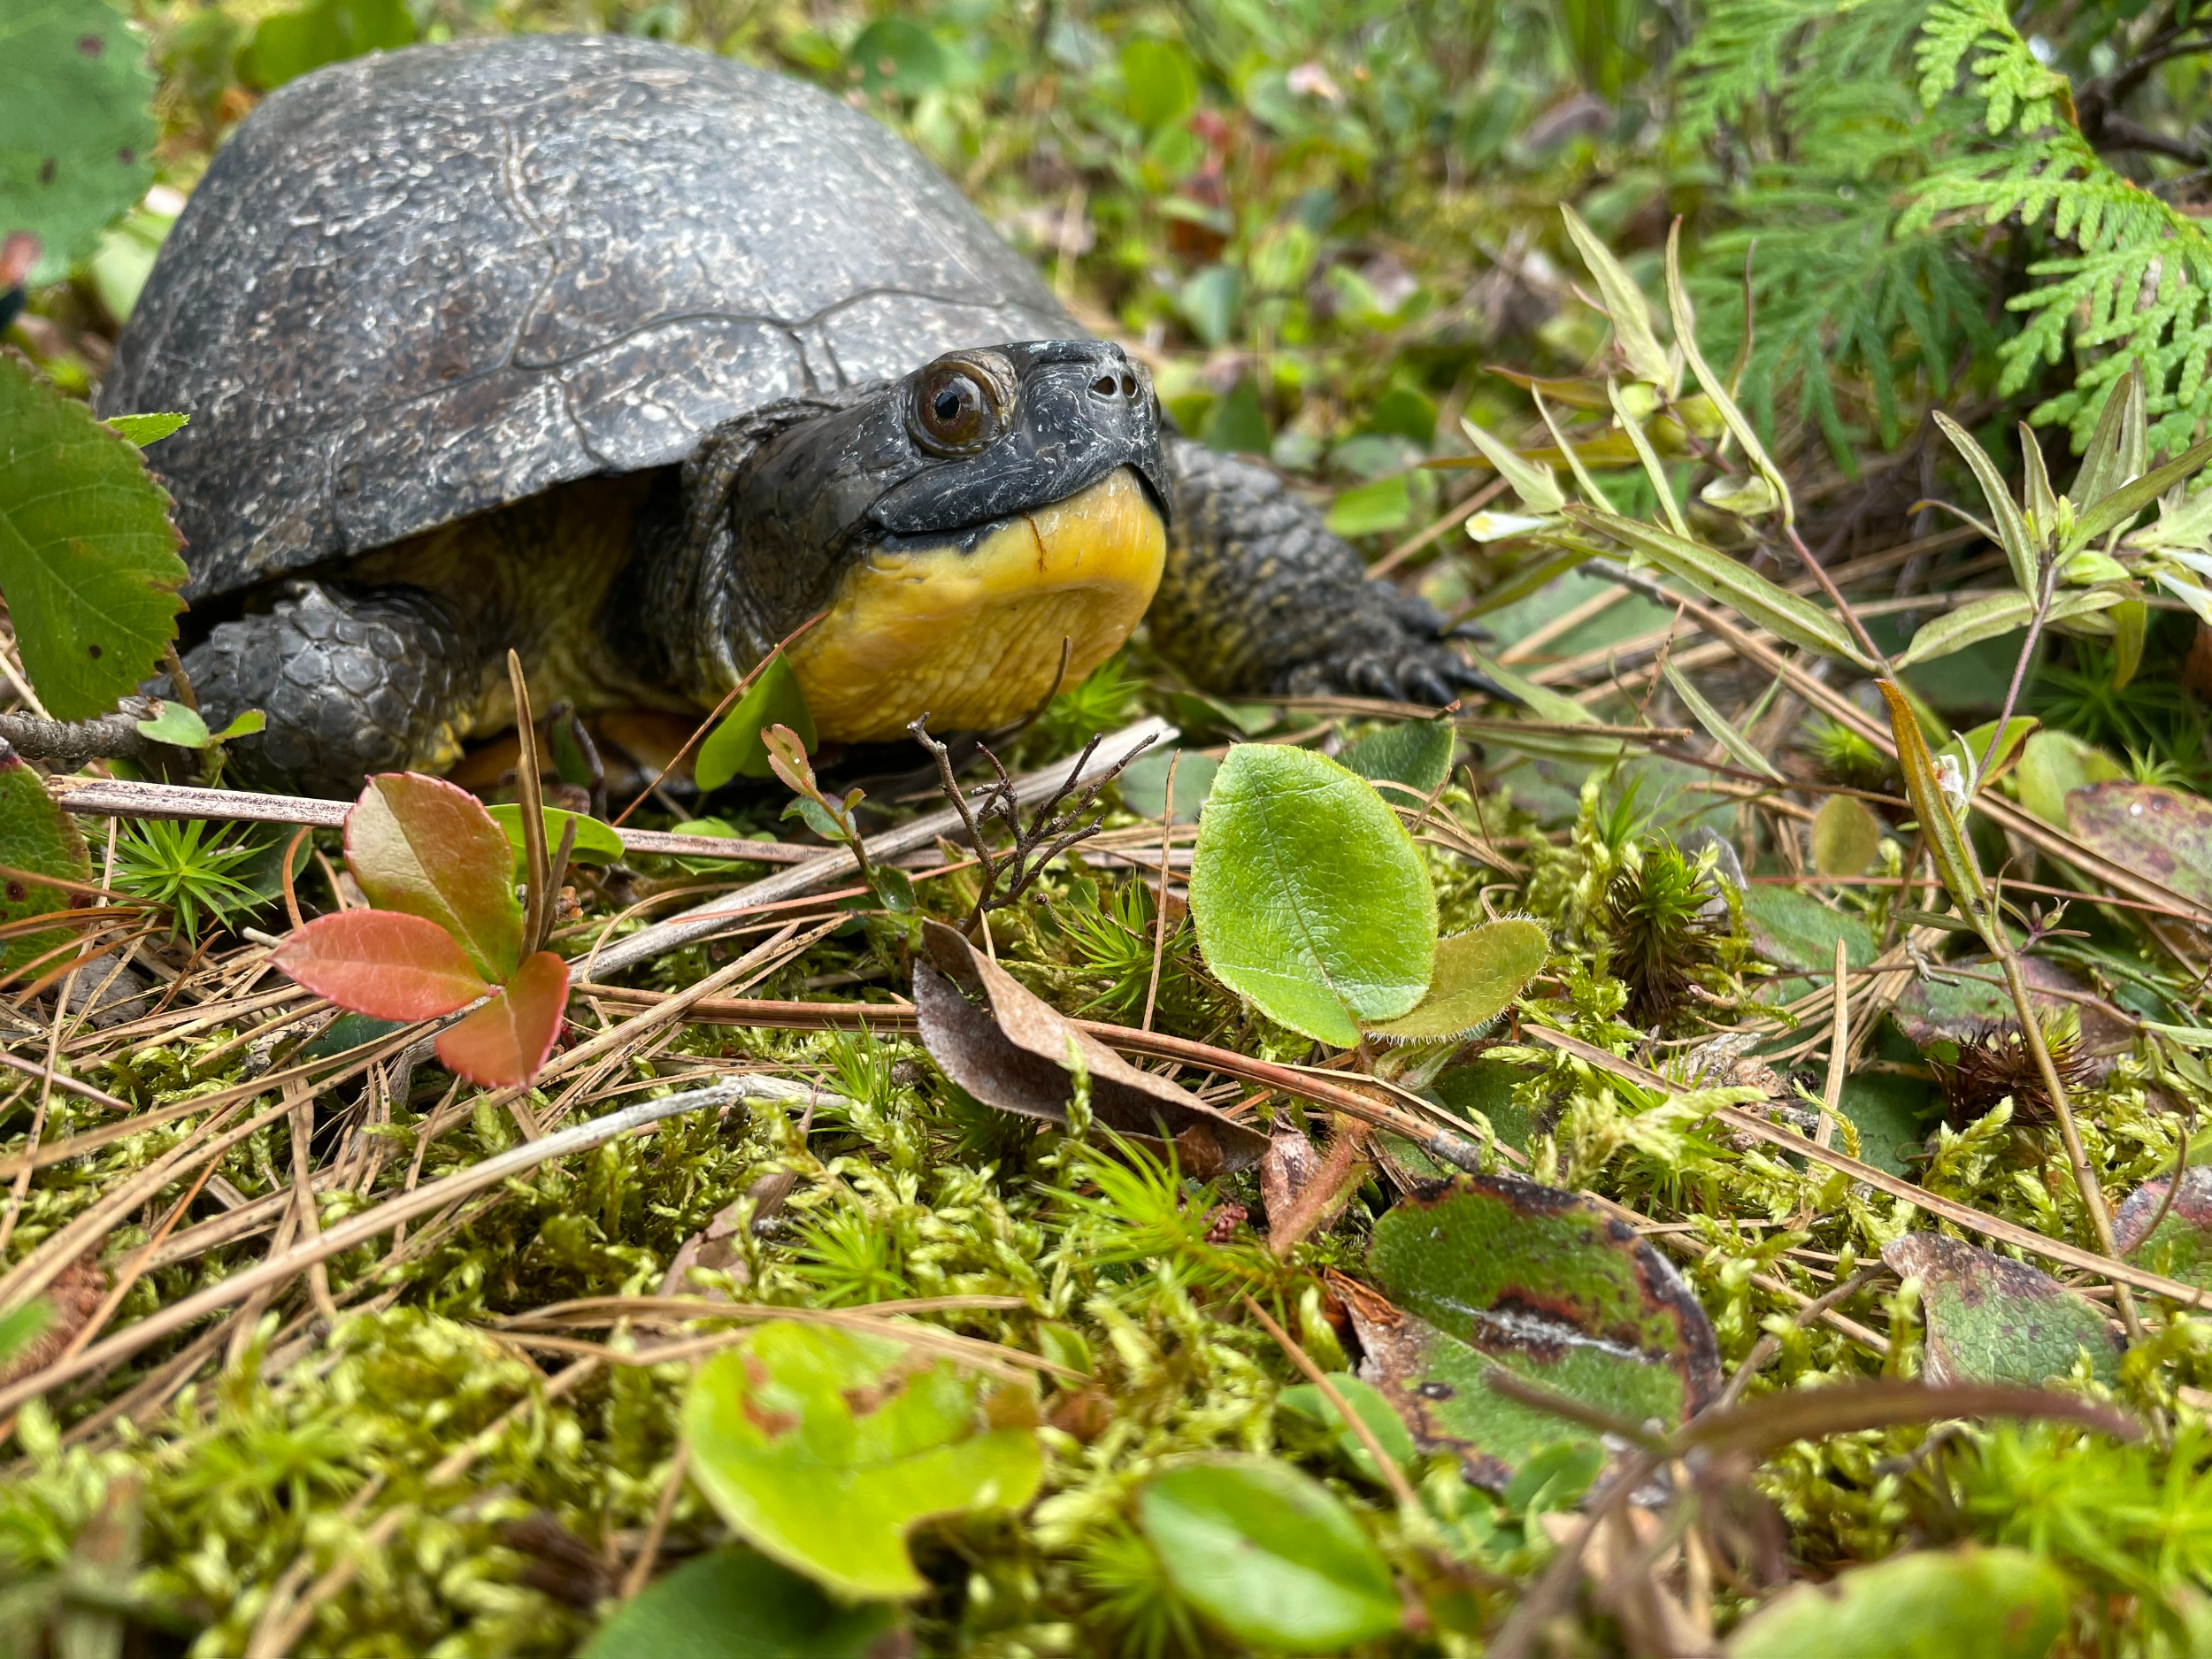 Quarry proposal in The North Shore, Ontario: A Blanding's turtle walks along moss and fallen leaves